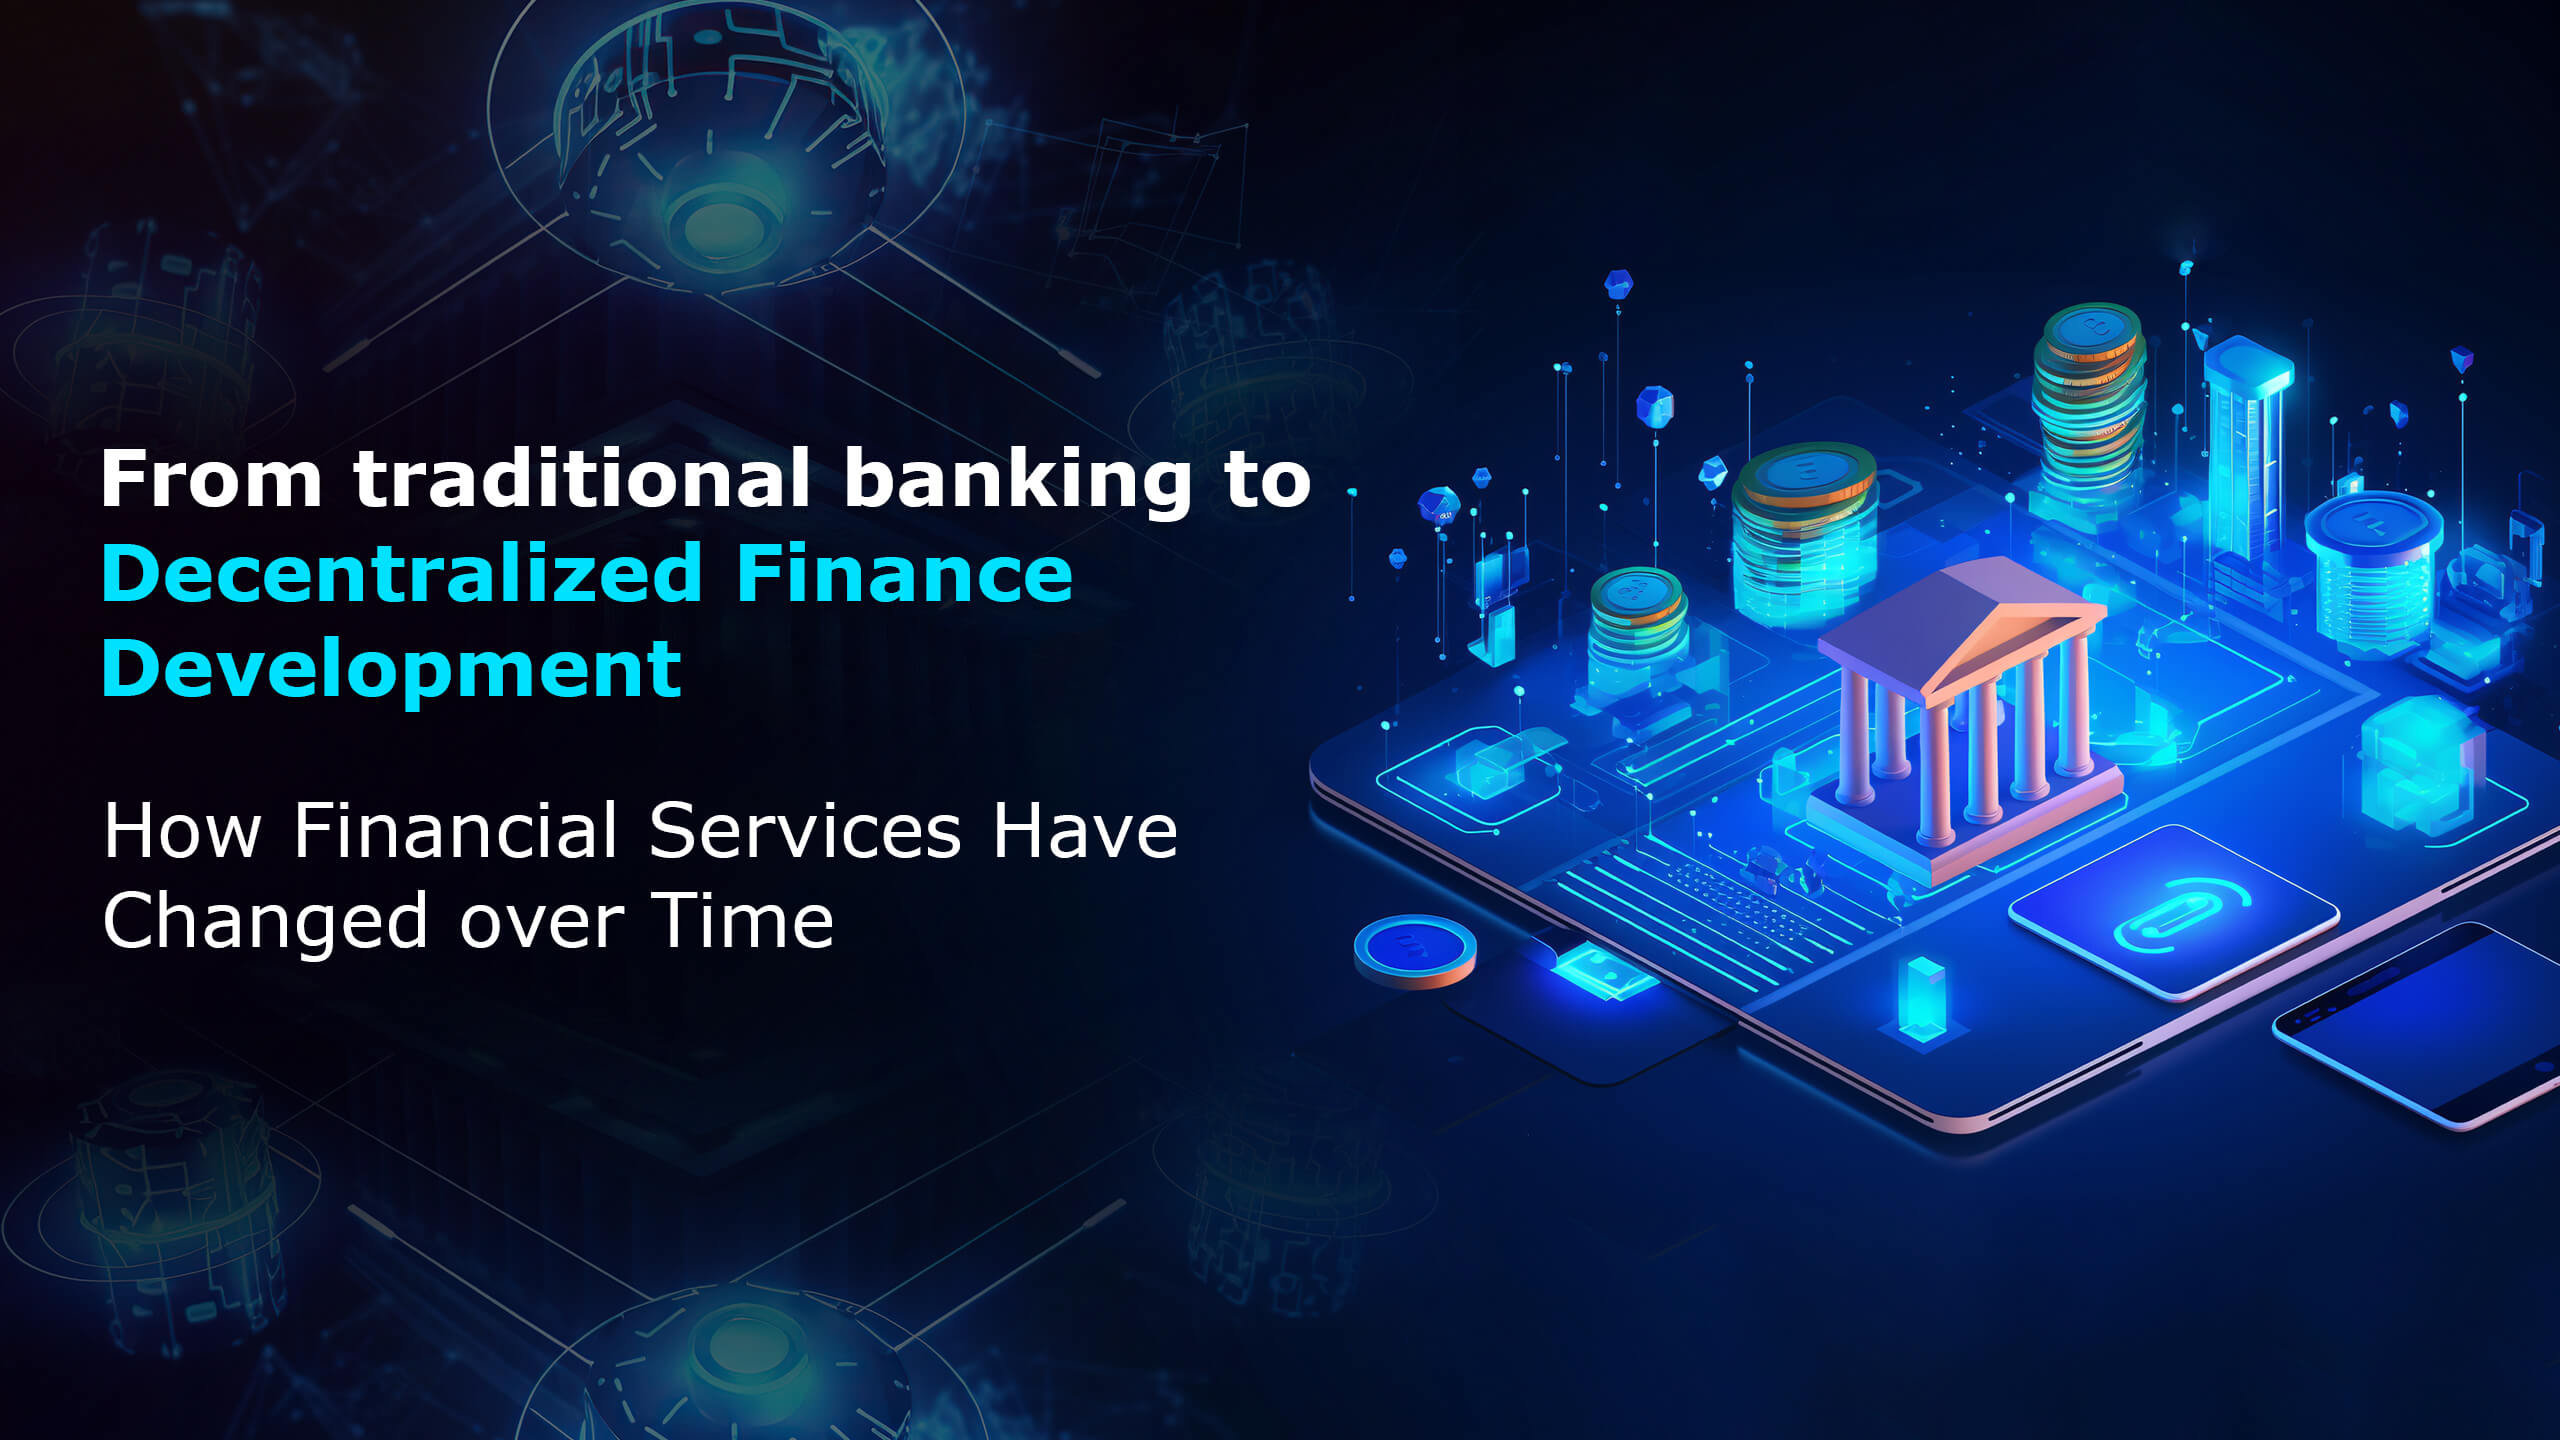 From traditional banking to Decentralized Finance Development